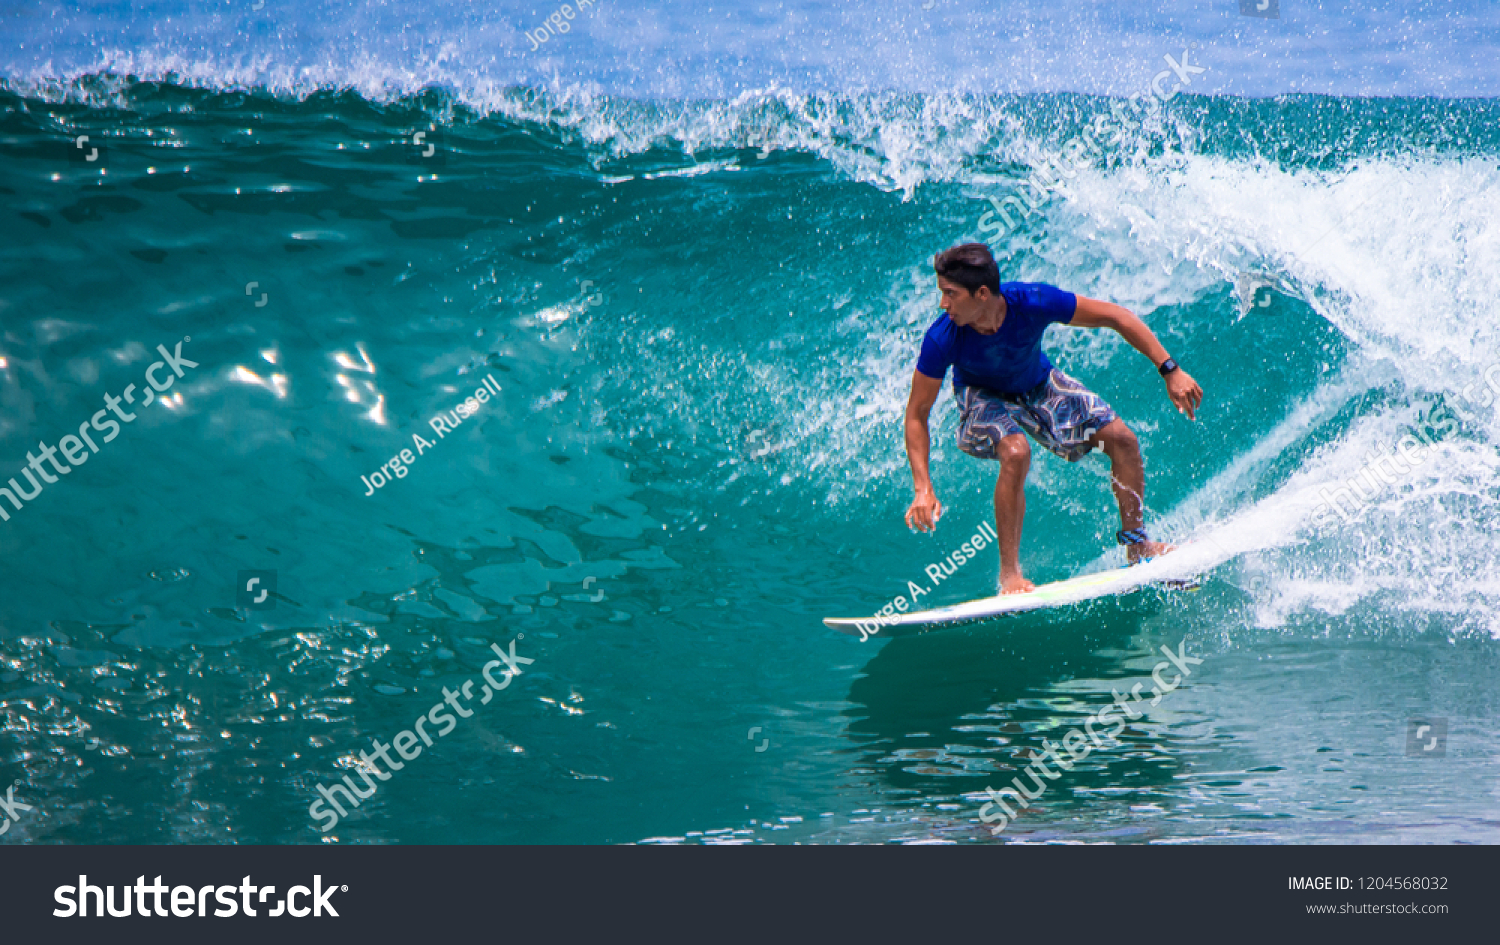 Riding the waves. Costa Rica, surfing paradise #1204568032